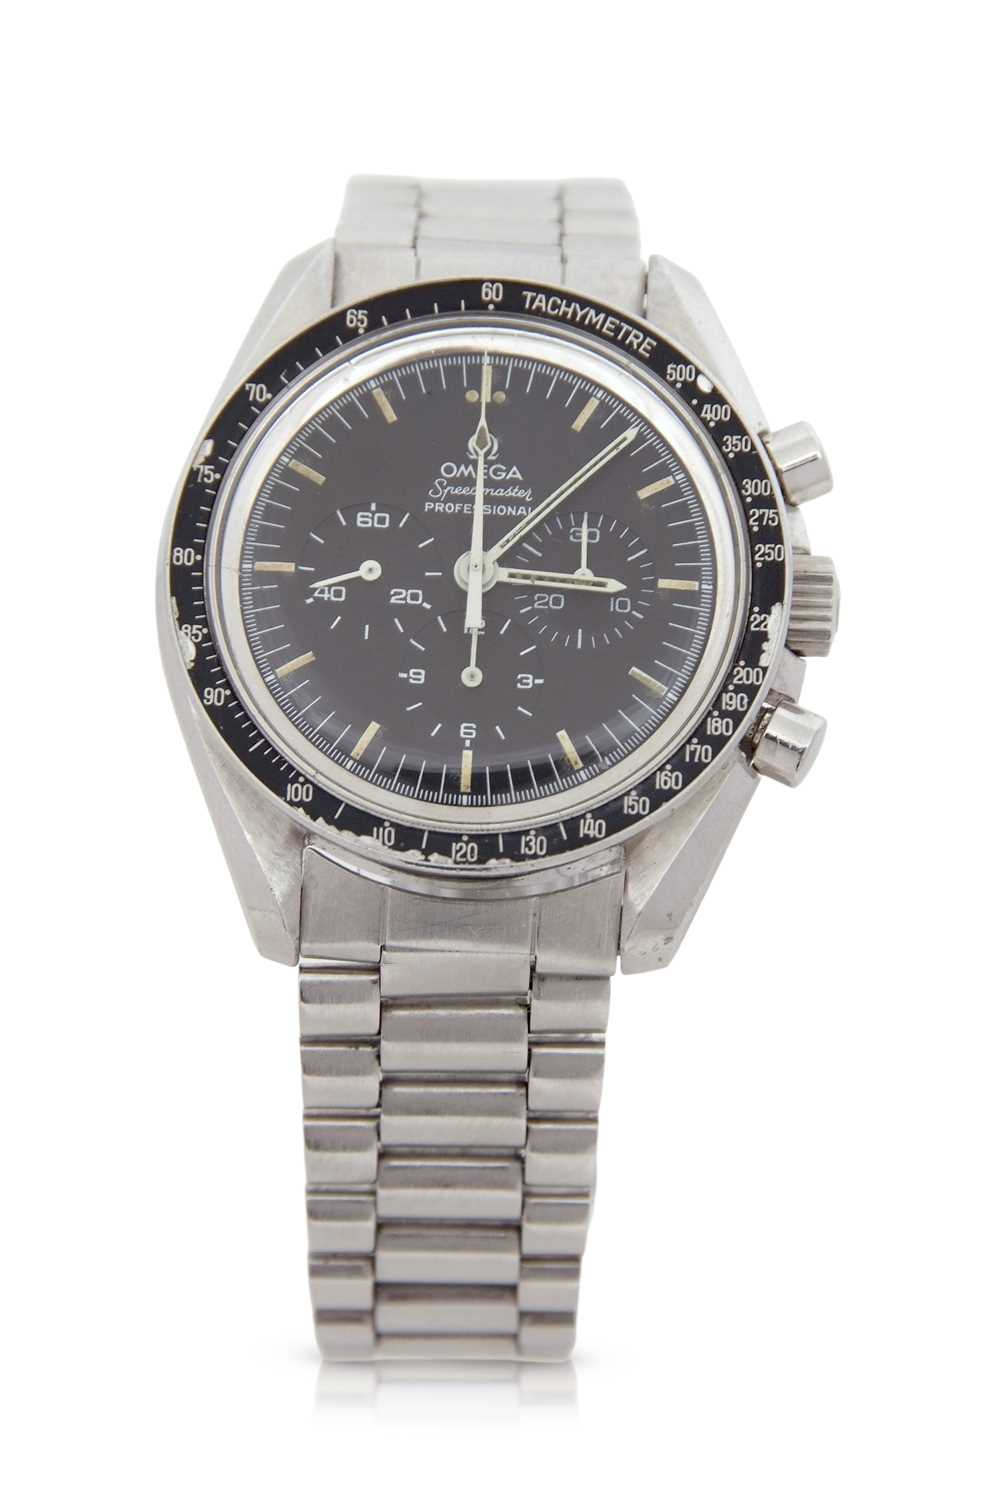 A 1977 Omega Speedmaster Professional wristwatch with extract from the archives paperwork, the watch